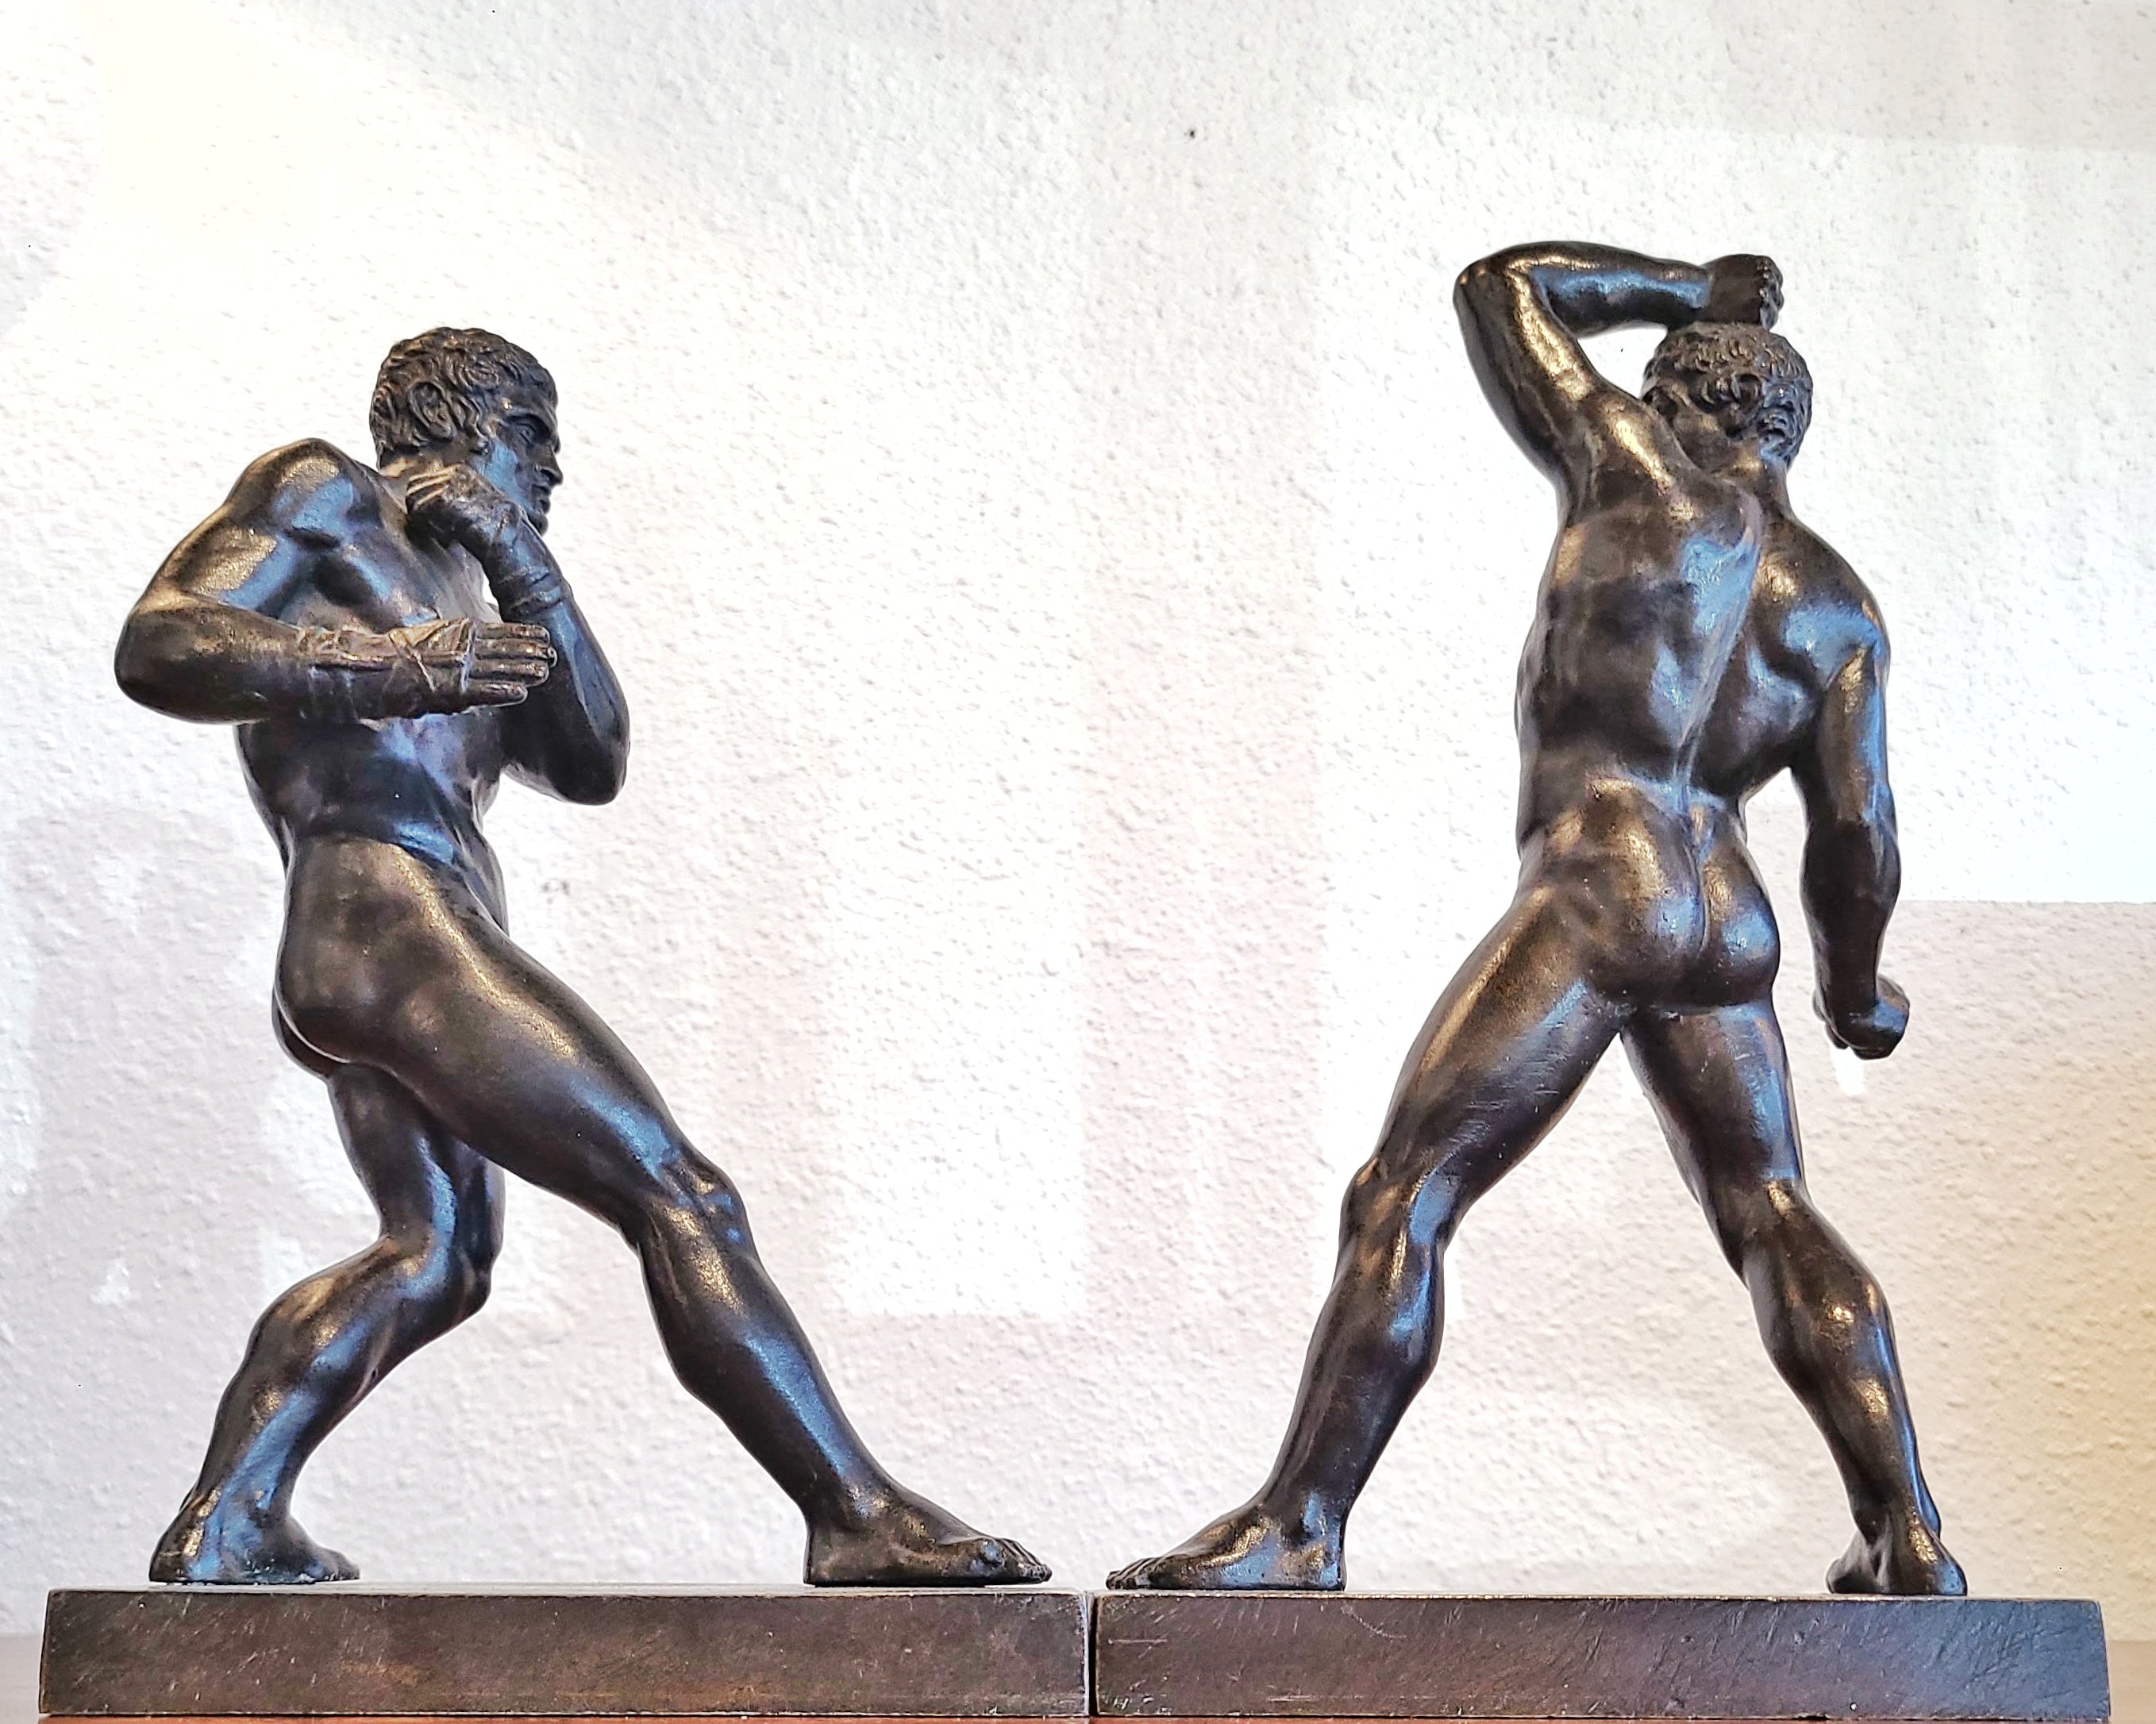 EARLY 19th CENTURY GRAND TOUR BRONZES OF CREUGAS & DAMOXENOS (THE PUGULISTS) AFTER CANOVA